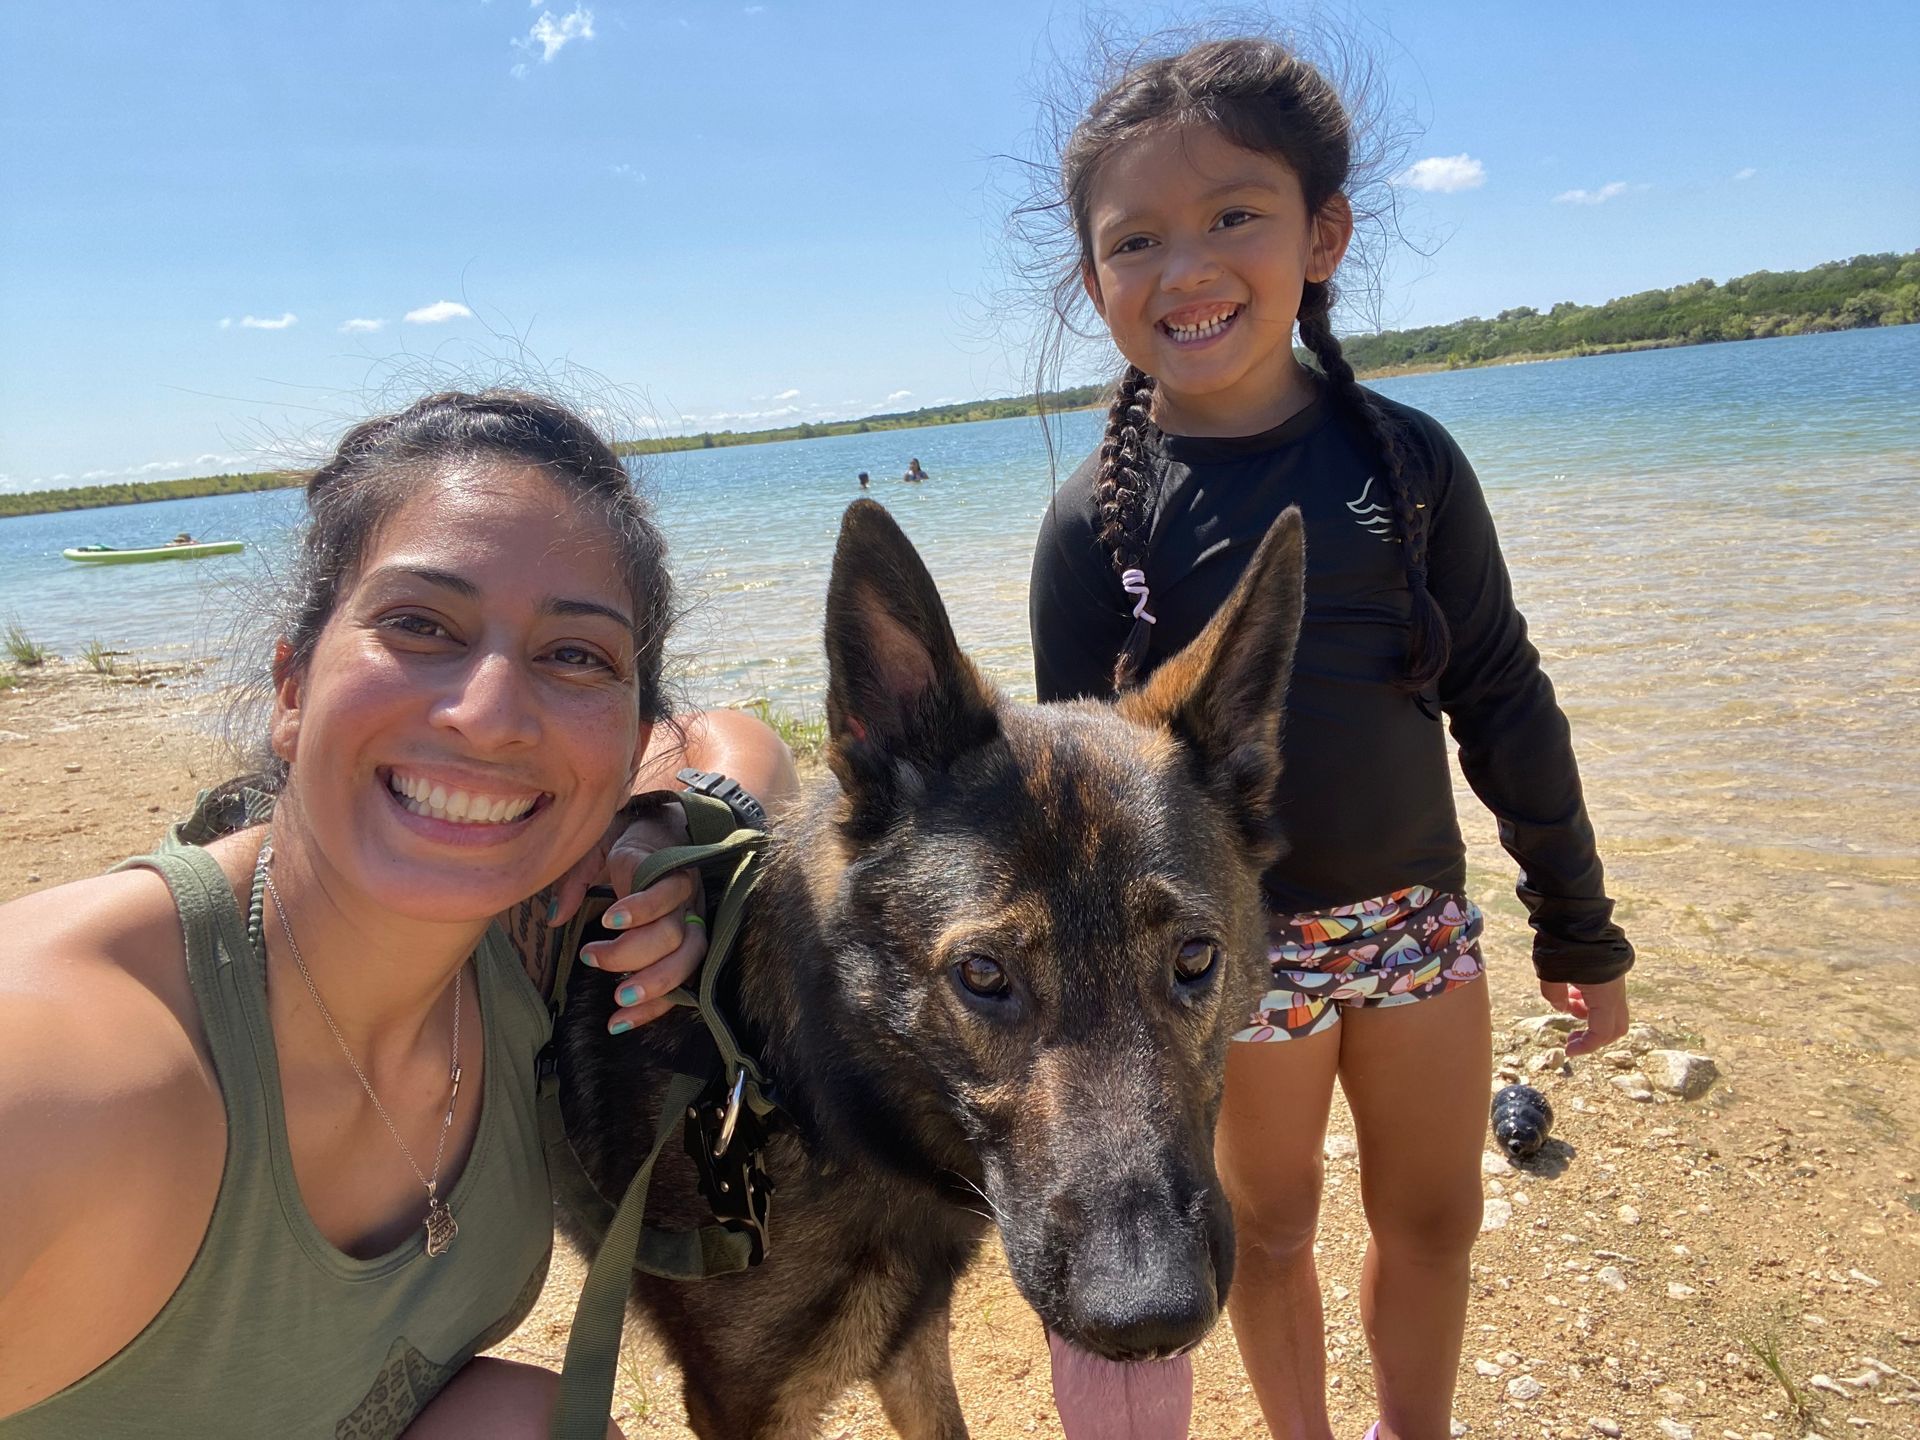 A woman and a little girl are posing for a picture with a dog on the beach.